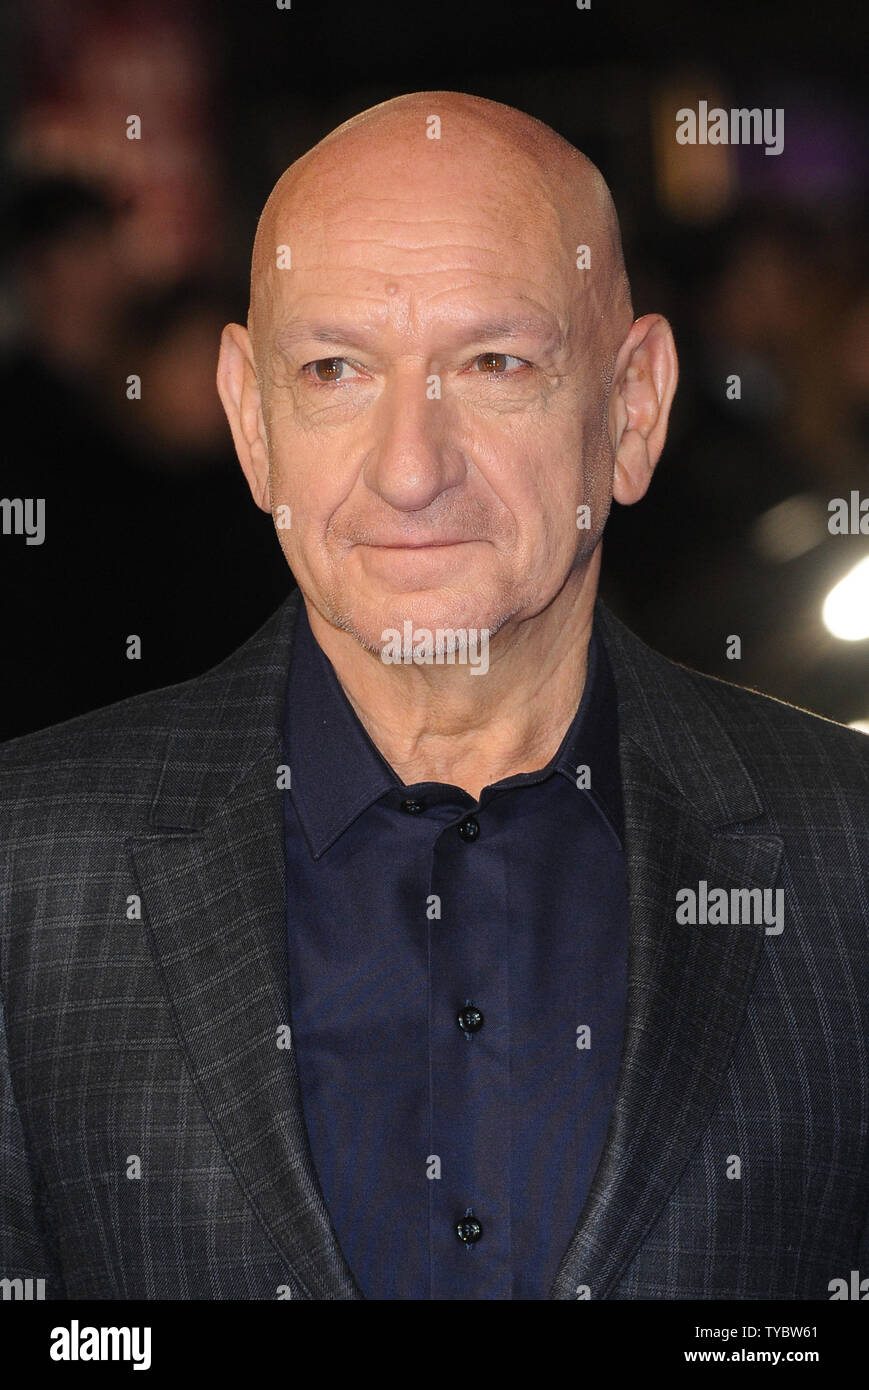 English actor Ben Kingsley attends the European Premiere of 'Night At The Museum: Secret Of The Tomb' at Empire Leicester Square in London on December 15, 2014.     UPI/Paul Treadway Stock Photo